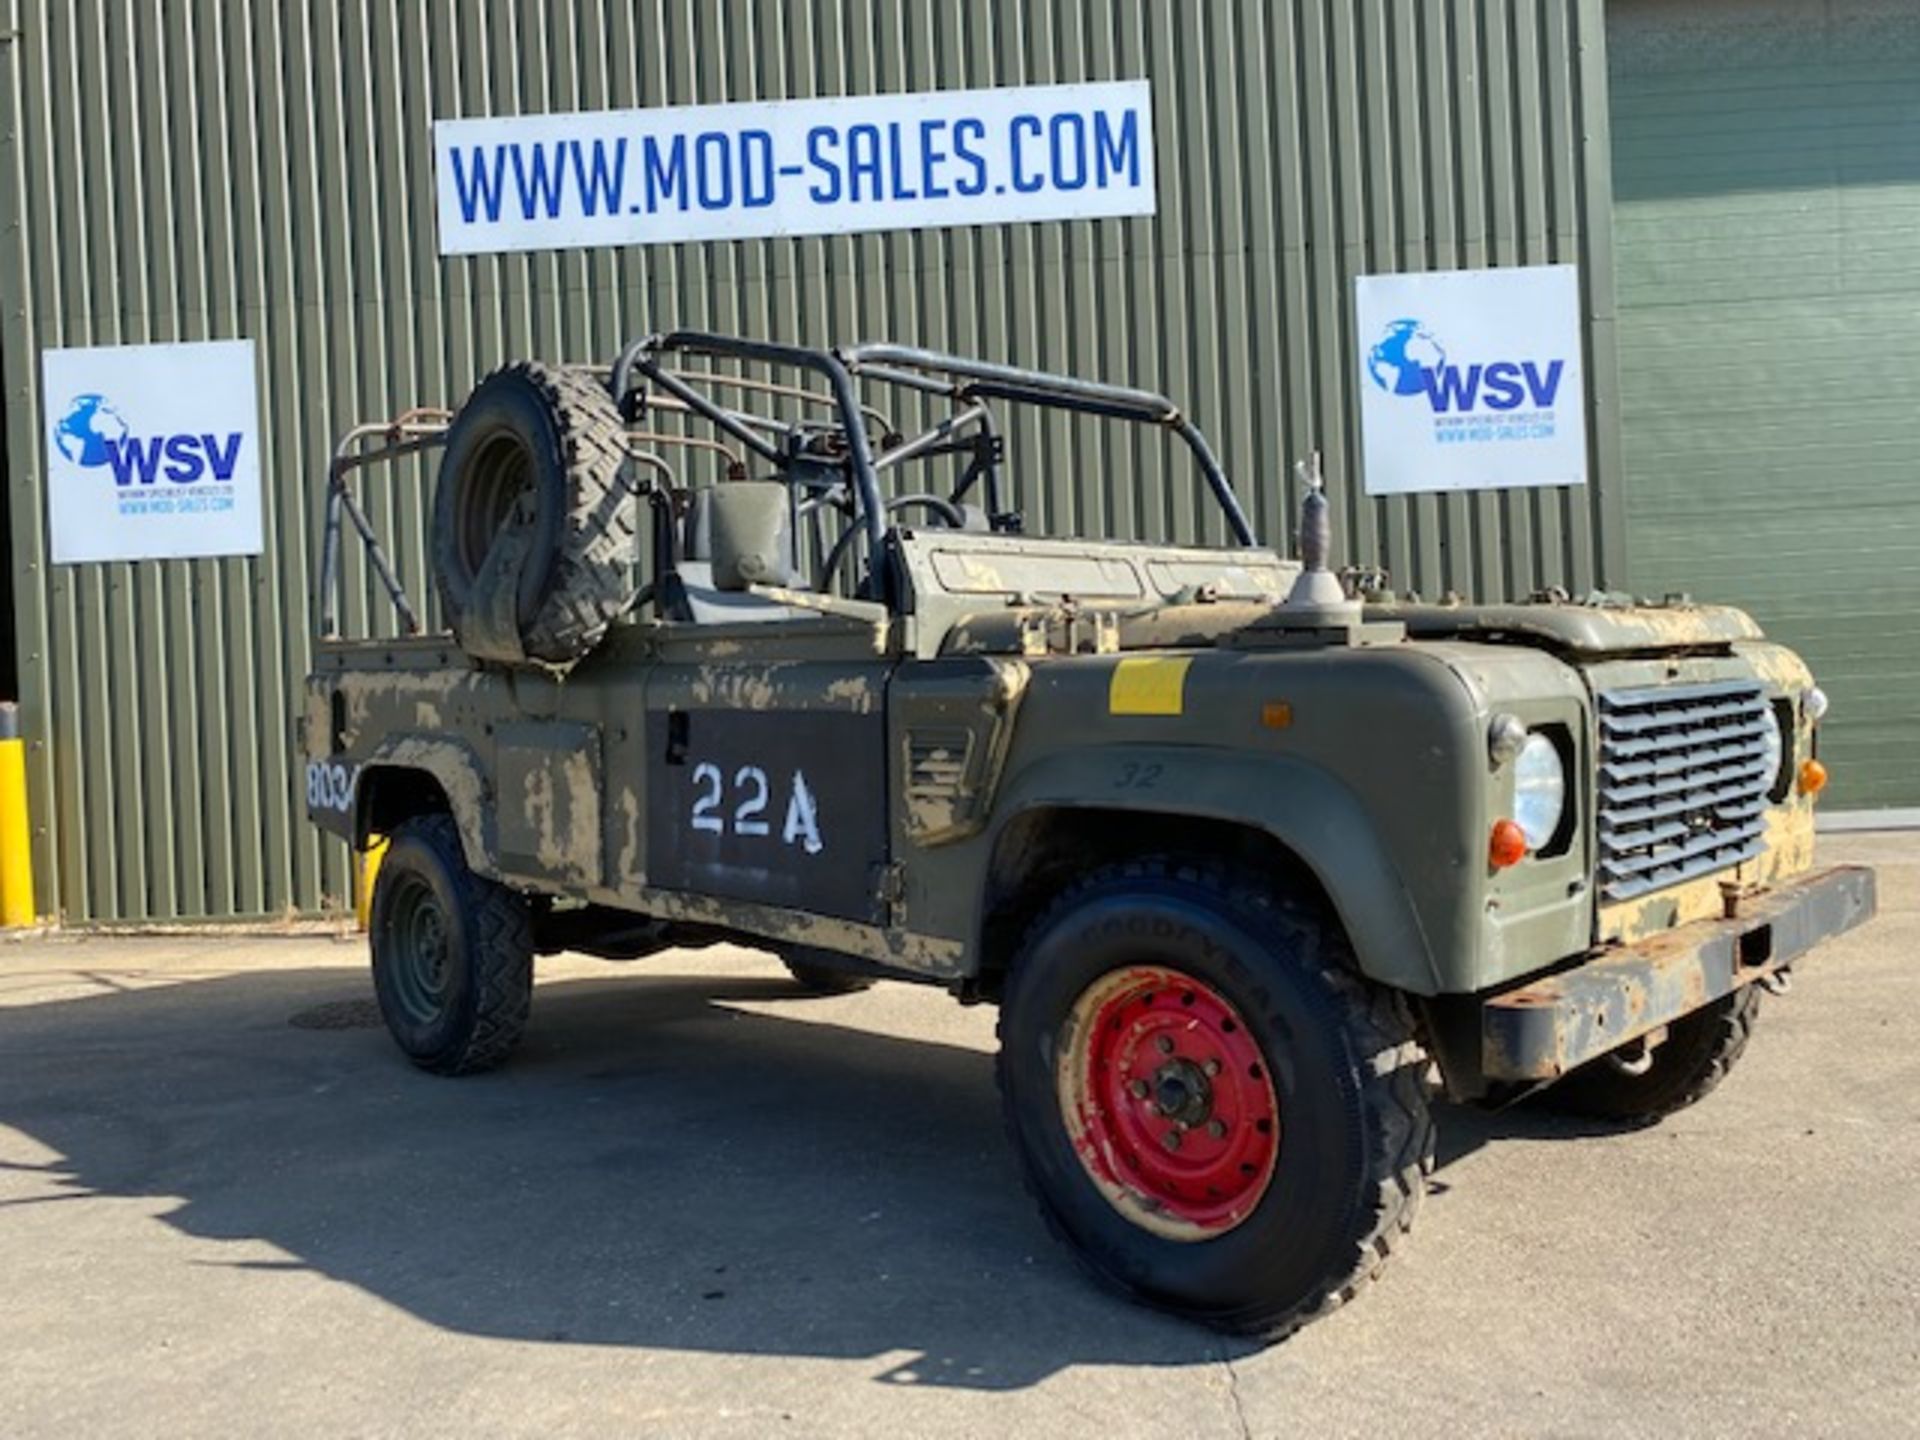 1998 Land Rover Defender Wolf 110 Scout vehicle